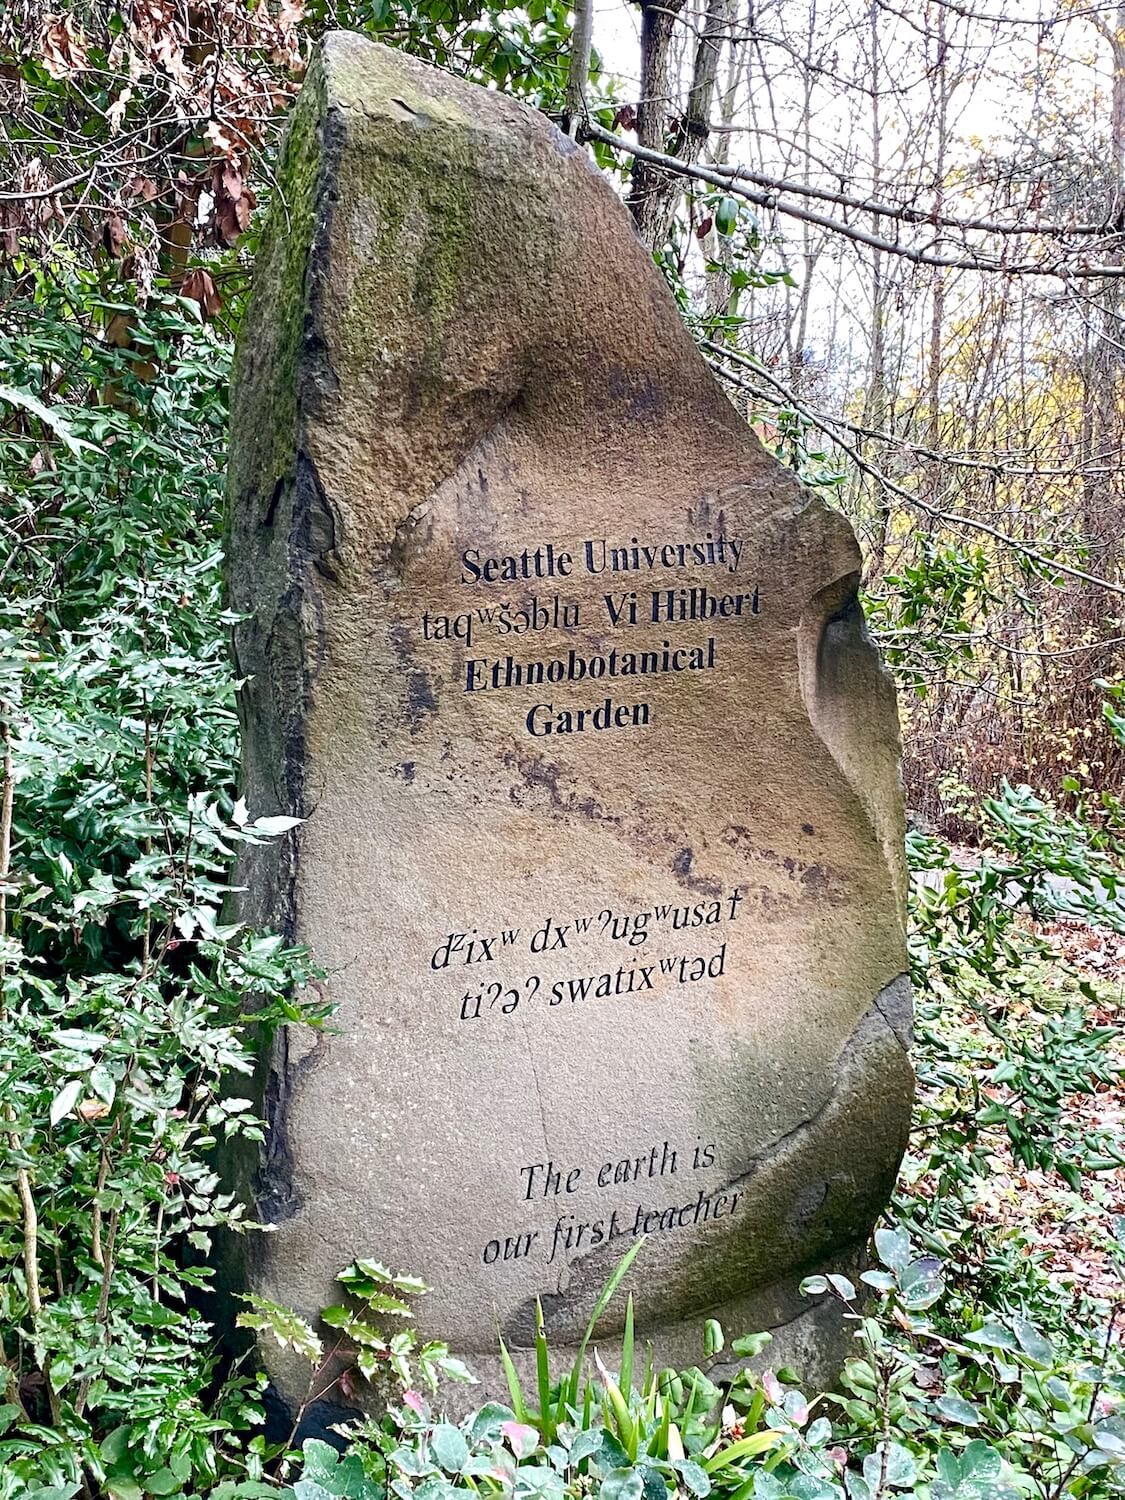 A giant rock greets people entering Seattle University.  It is surrounded by thick green vegetation and says "Vi Hilbert Ethnobotanical Garden."